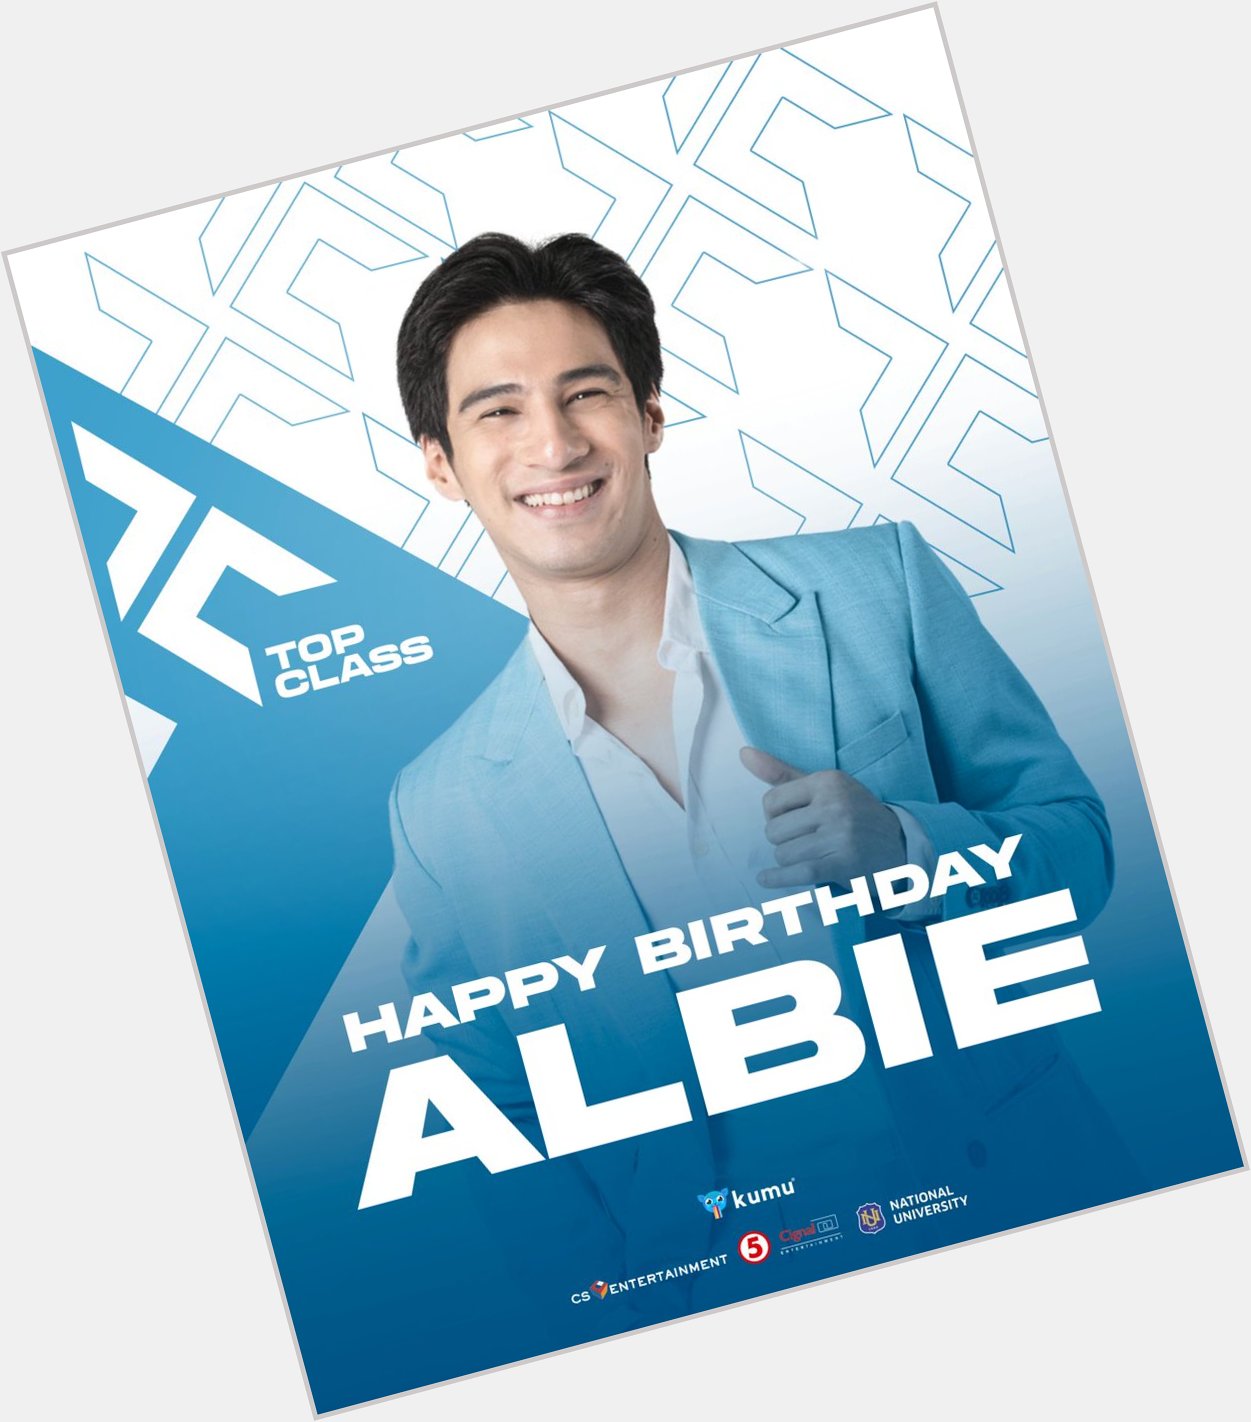 Wishing our co-host and Campus Jock, Albie Casiño, A HAPPY BIRTHDAY!   